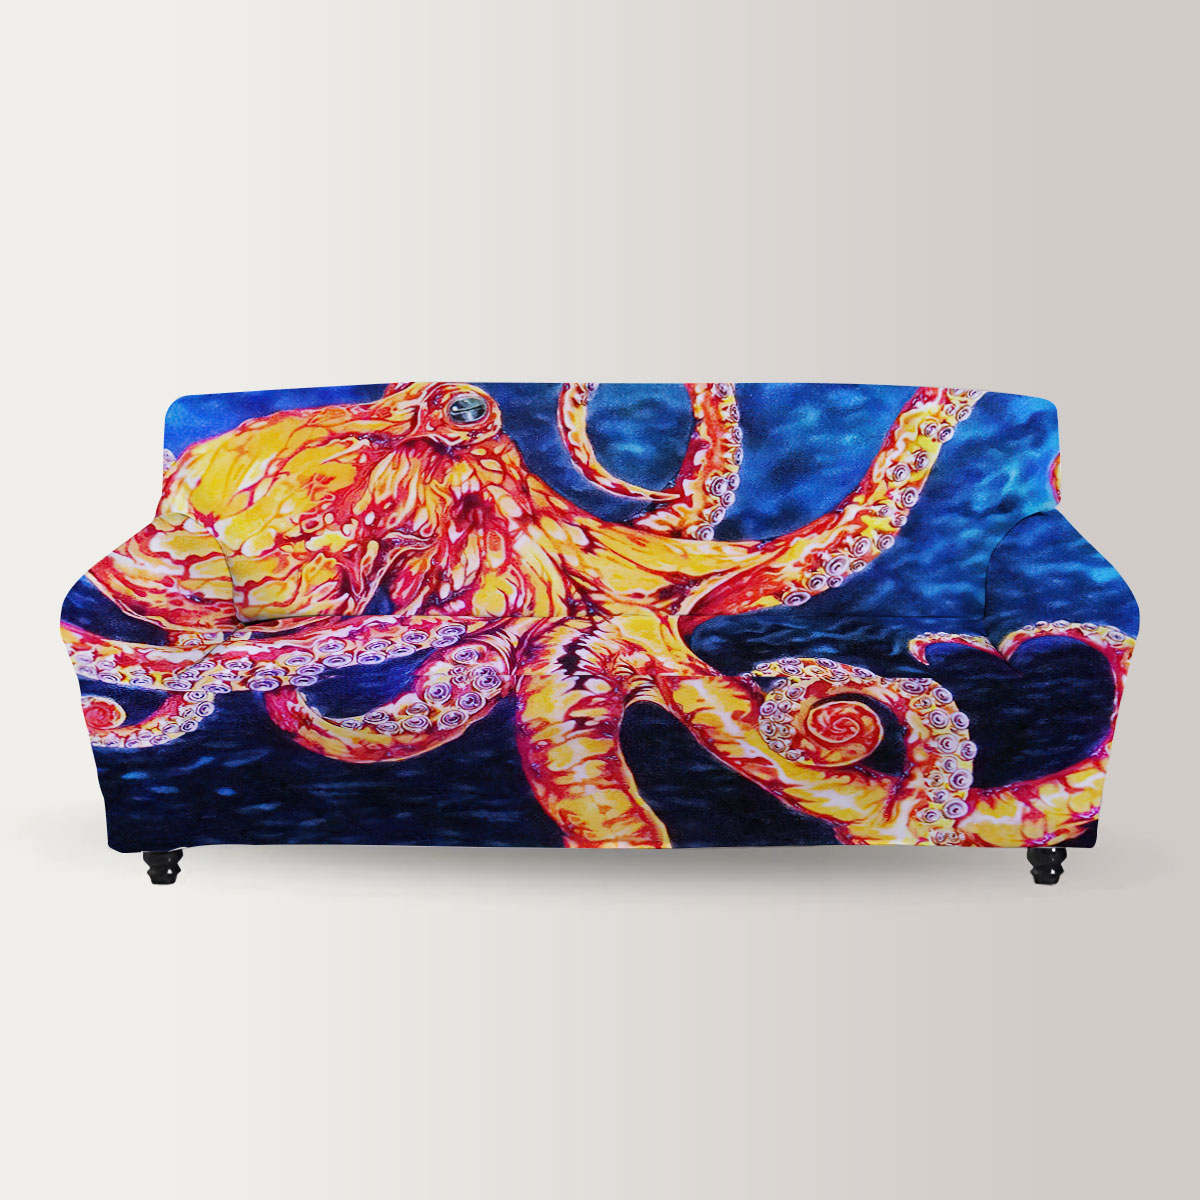 Psychedelic Octopus Sofa Cover